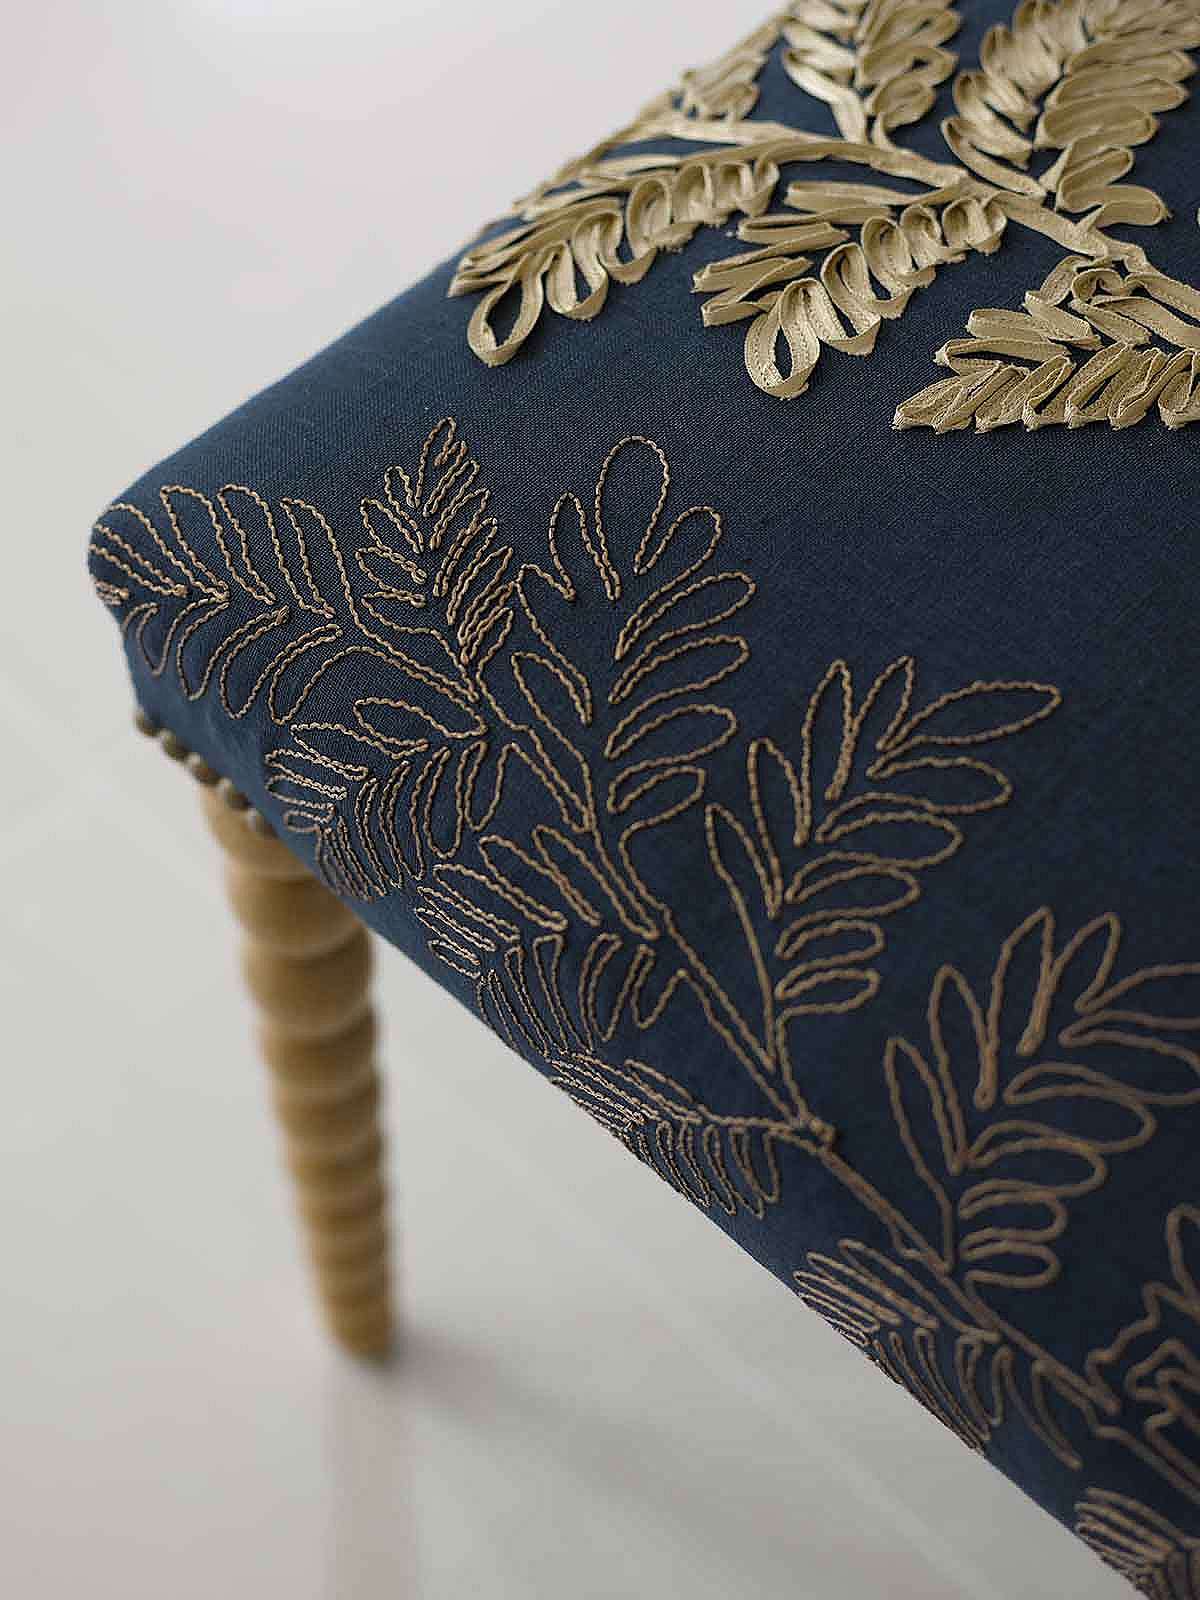 Hand made hallway stool with hand turned bobbin legs and close nailing detail